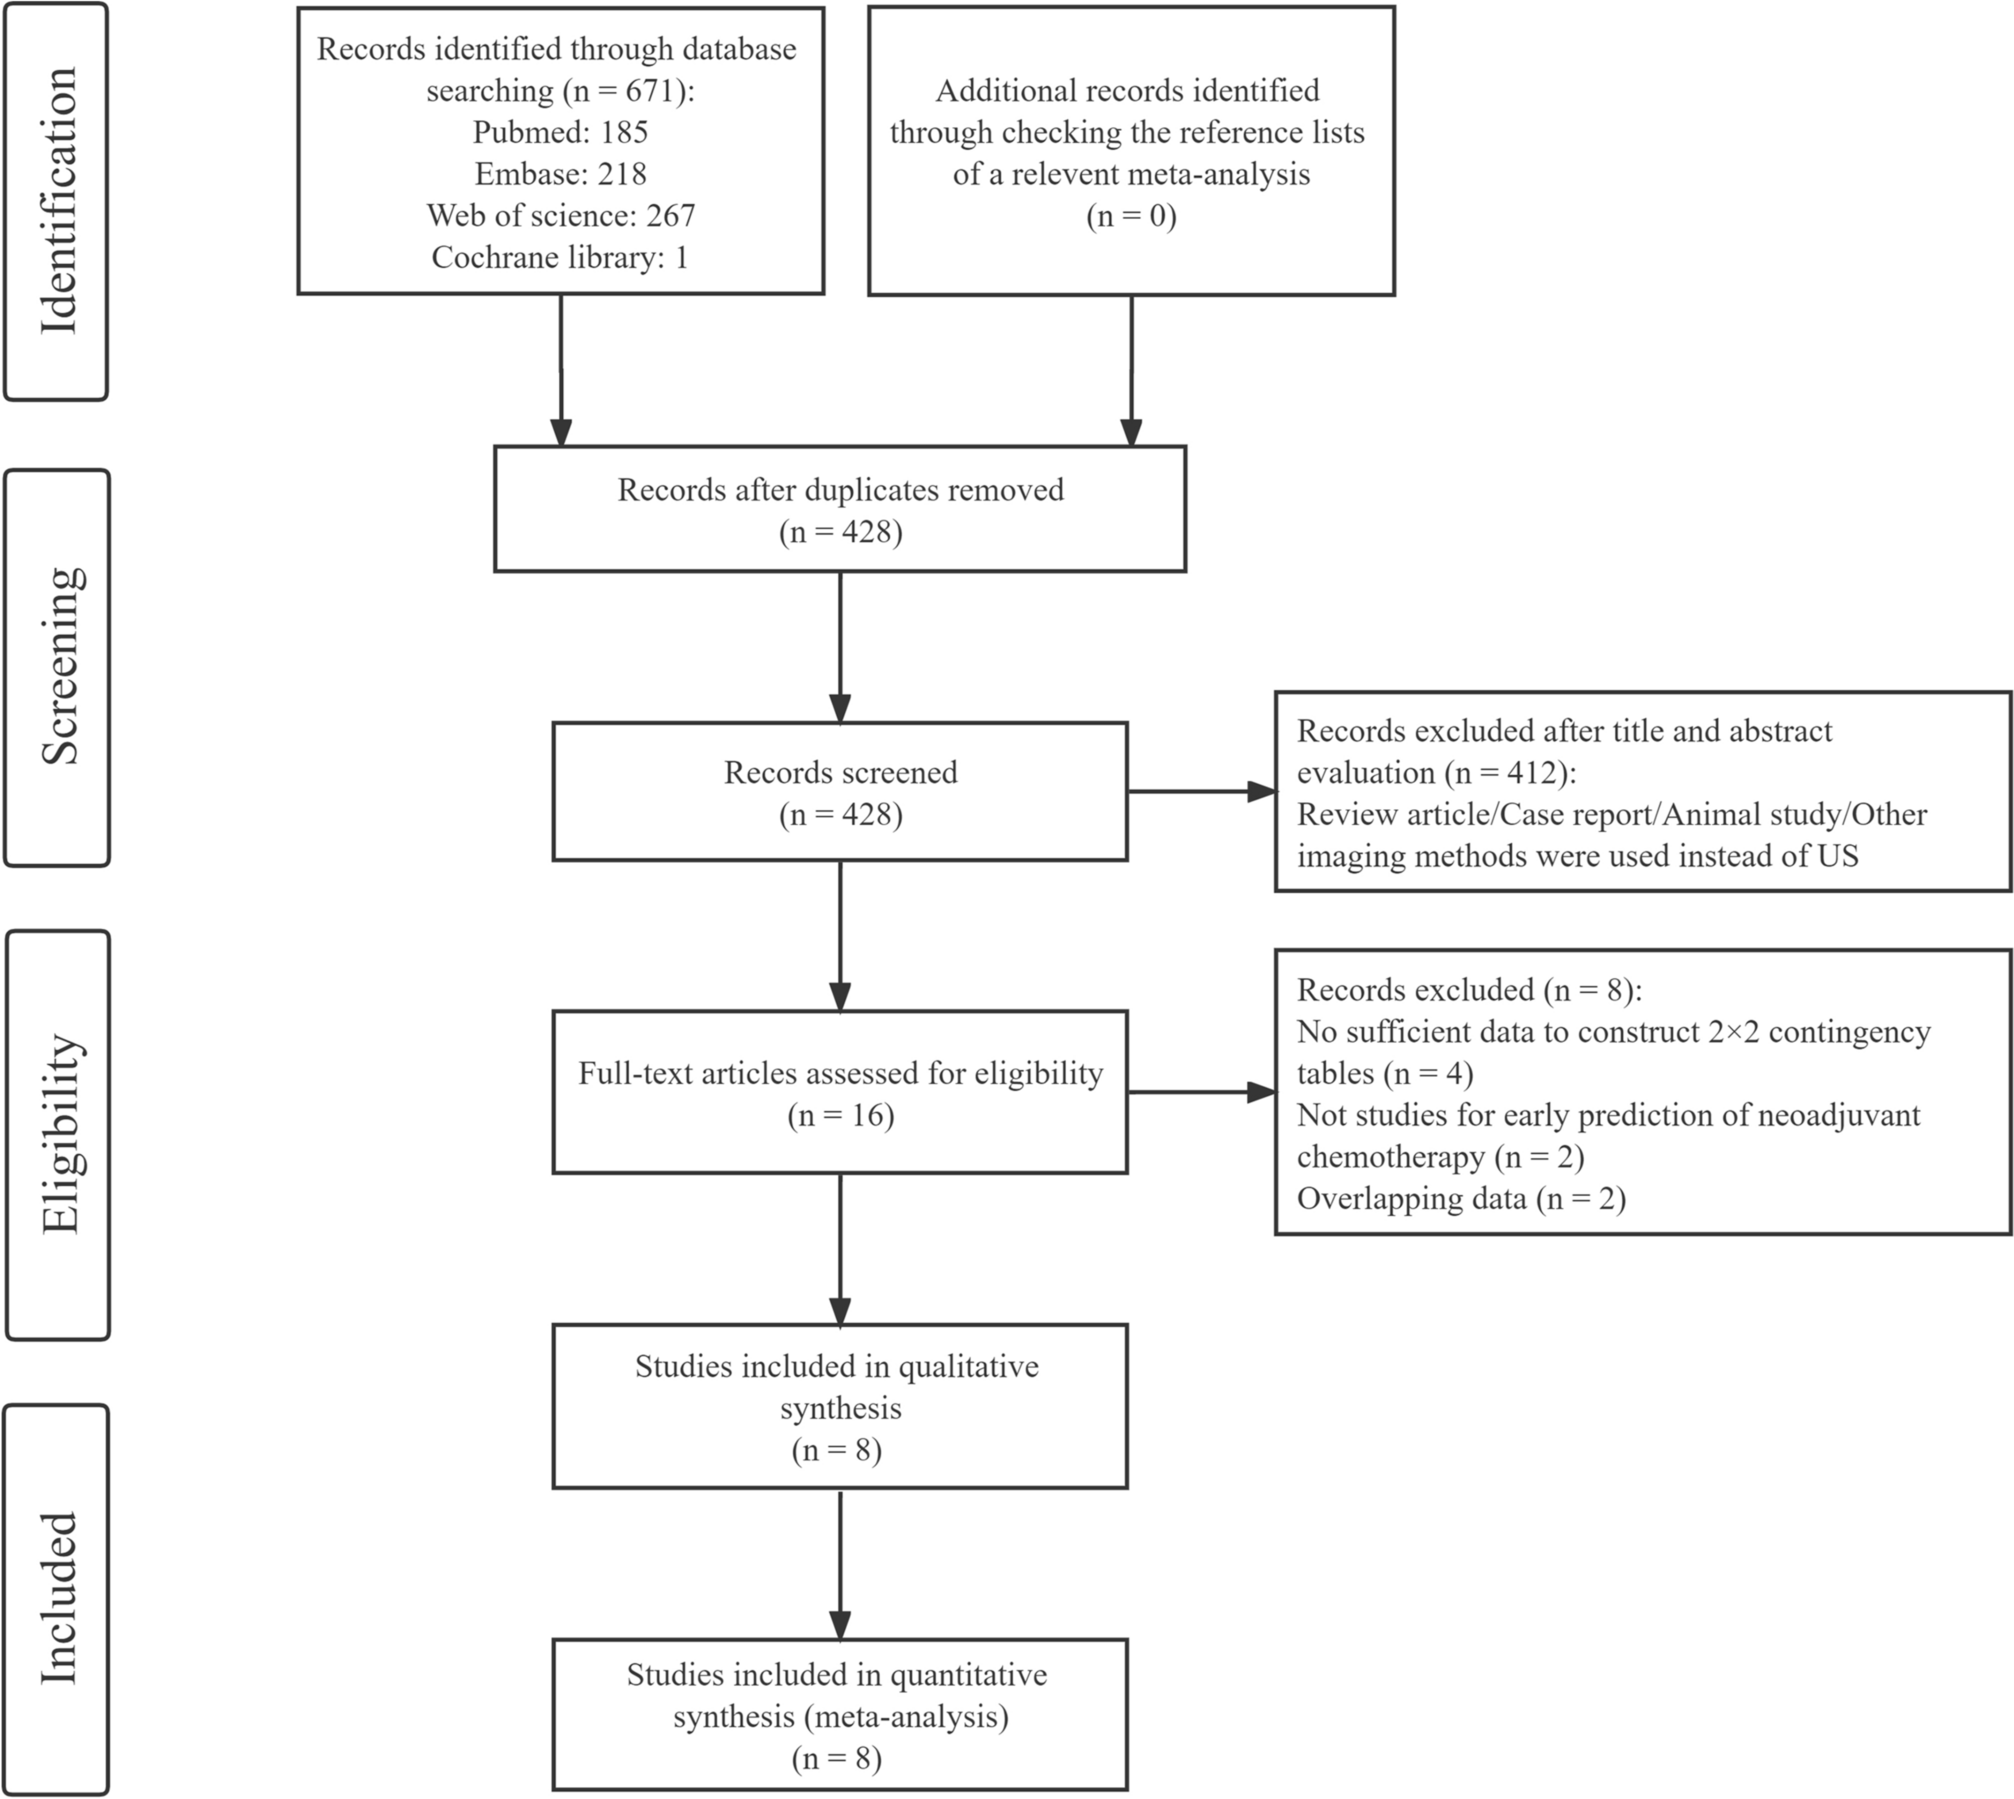 Ultrasound-based radiomics for early predicting response to neoadjuvant chemotherapy in patients with breast cancer: a systematic review with meta-analysis